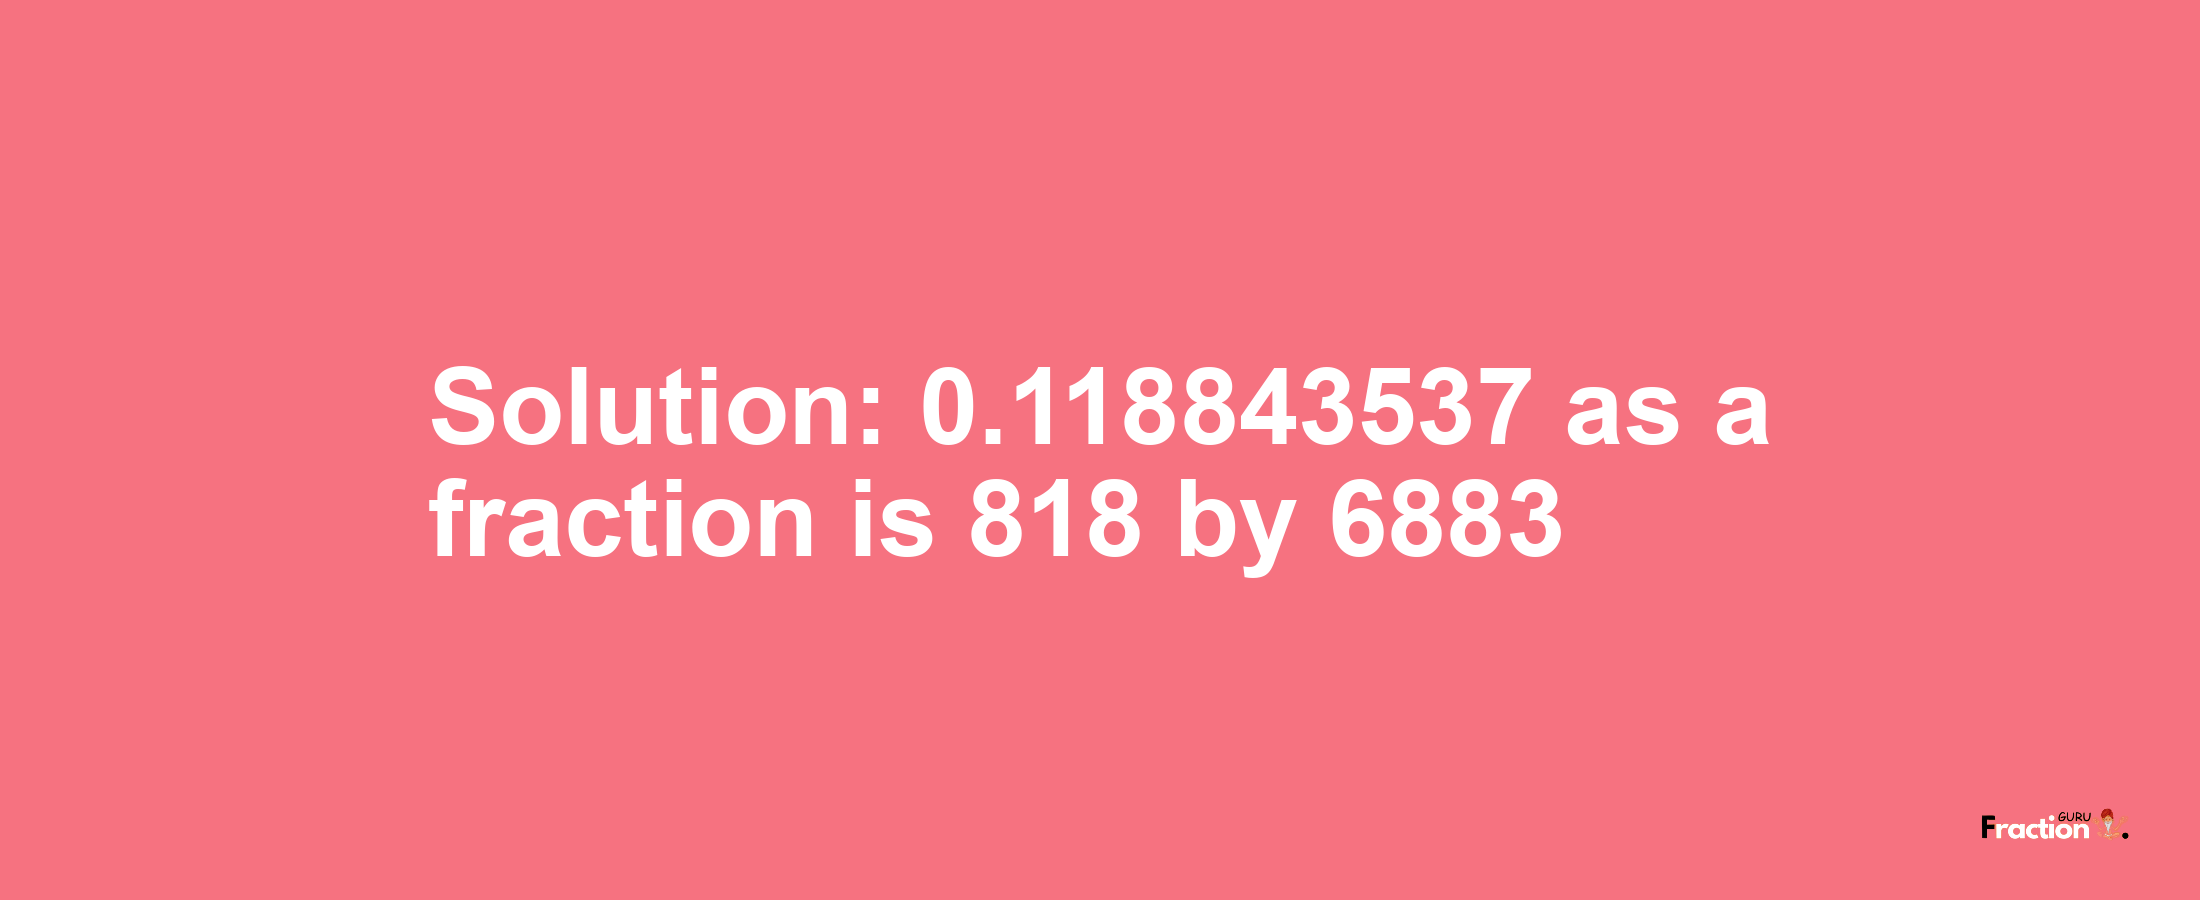 Solution:0.118843537 as a fraction is 818/6883